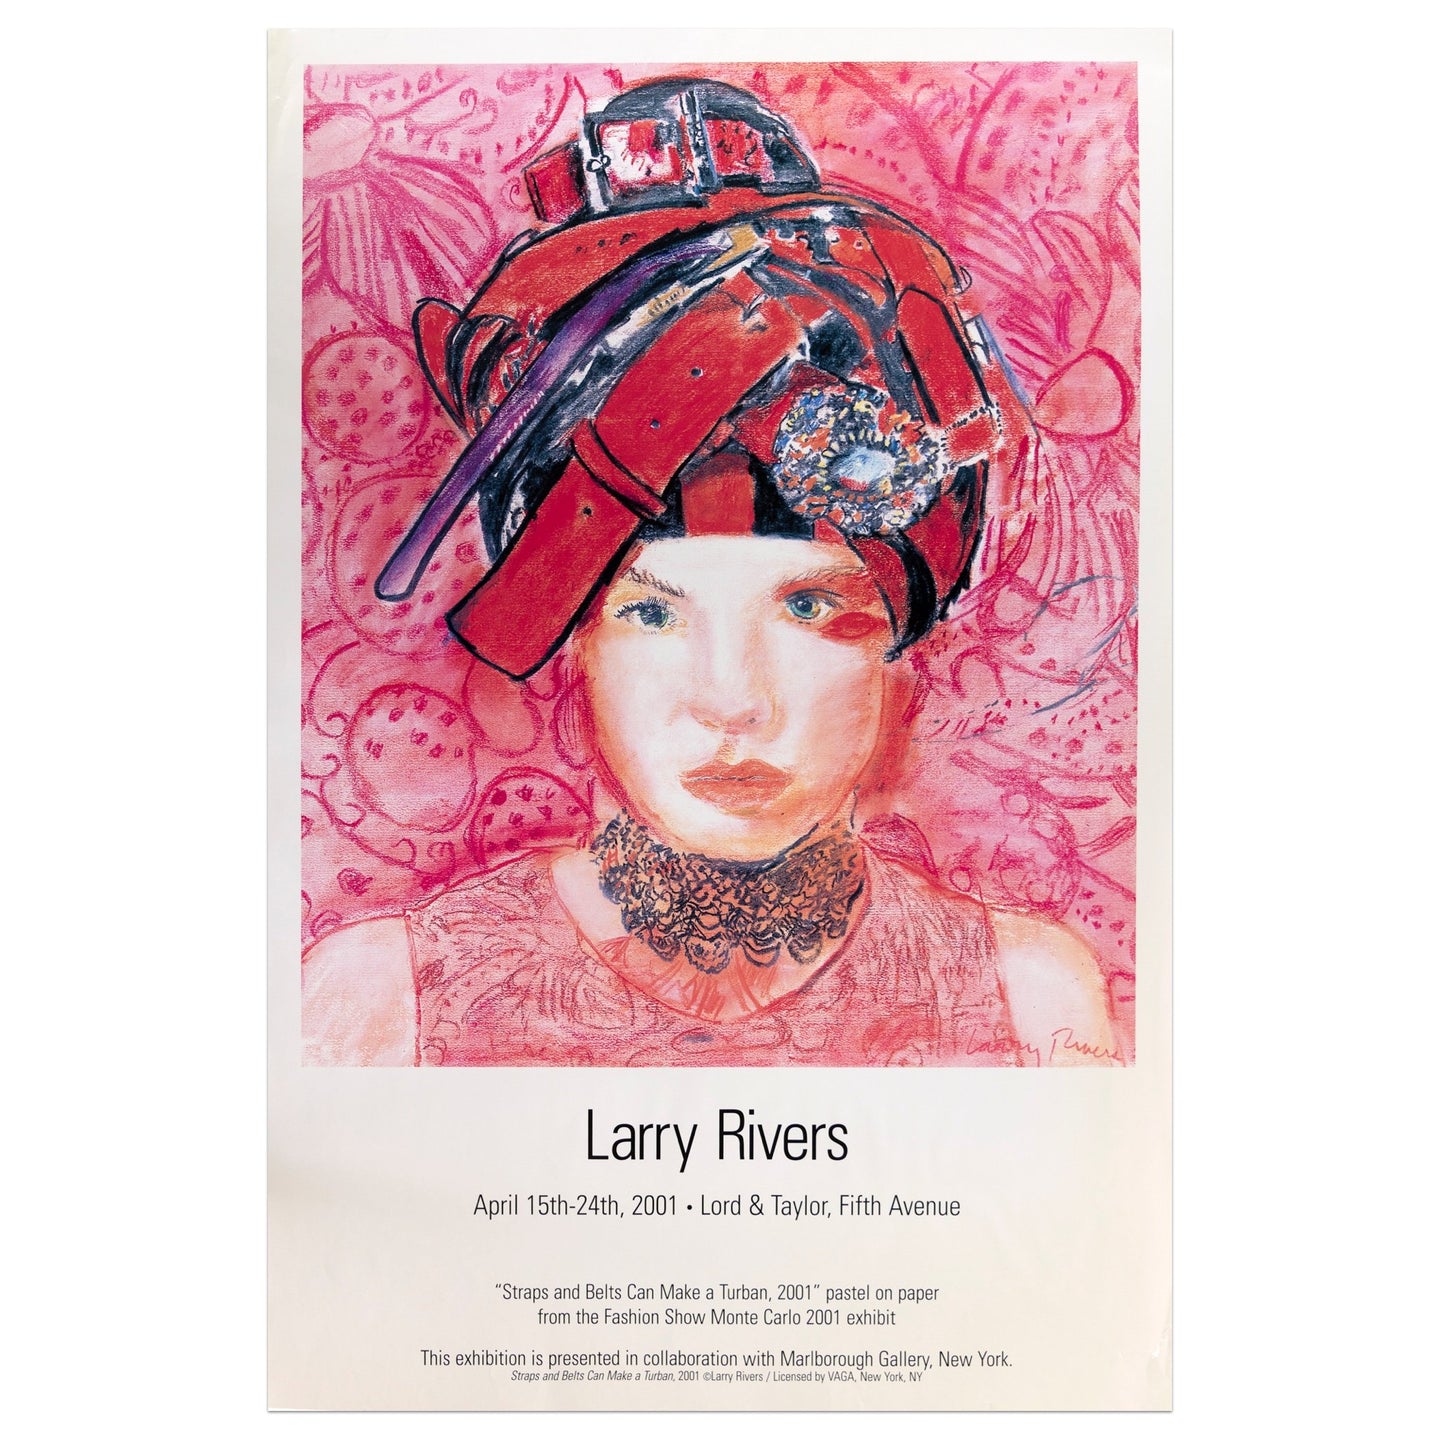 2001 Larry Rivers poster featuring a woman with a red belt head-piece against a pink patterned background